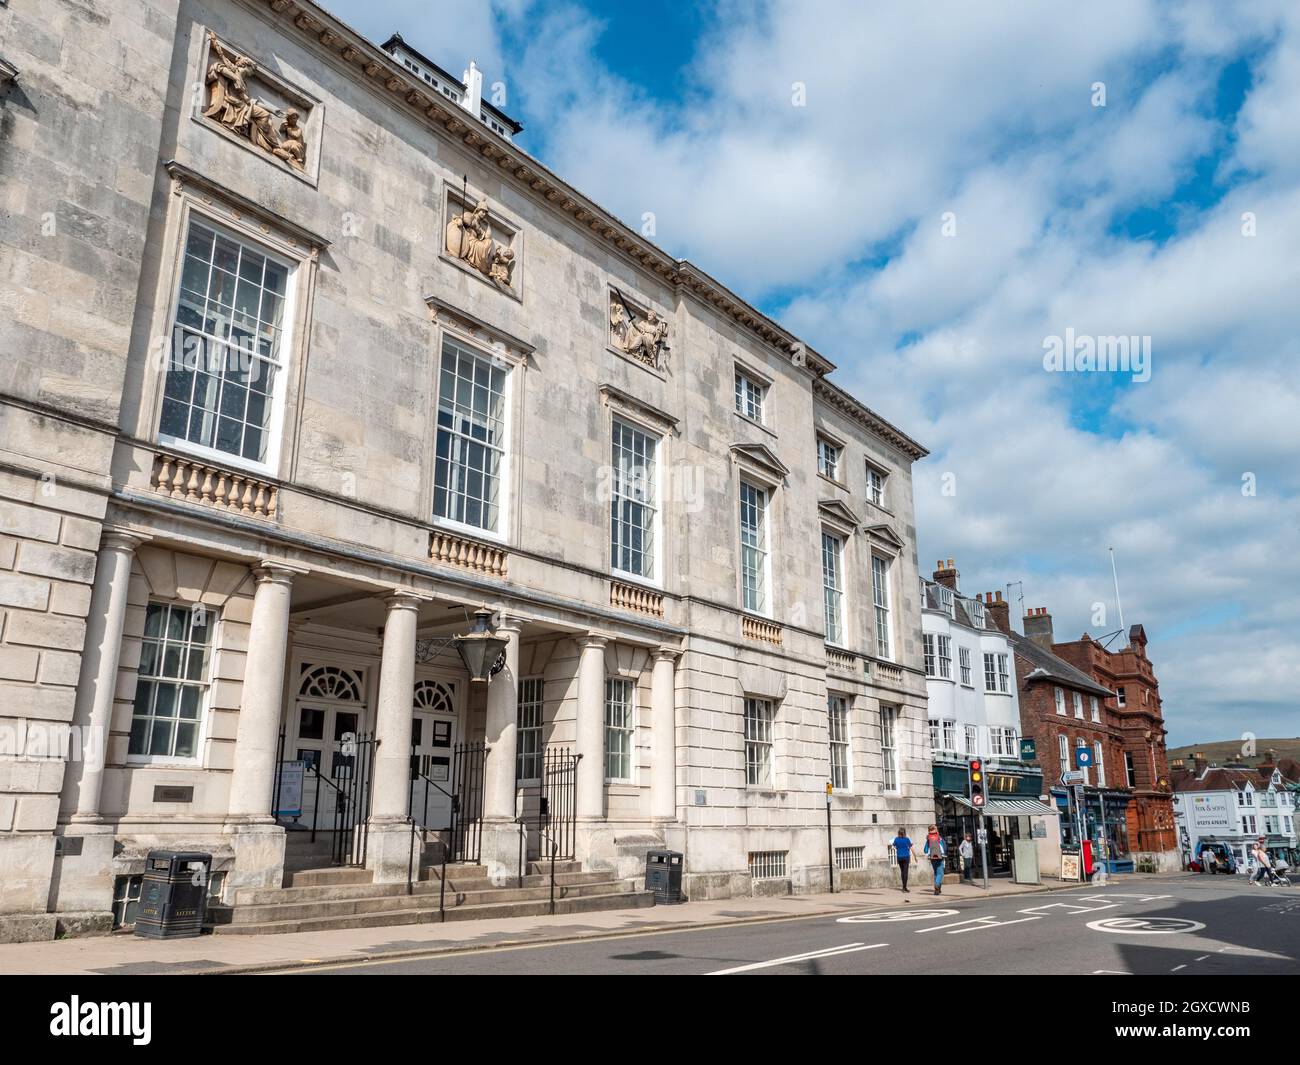 Lewes Crown Court, East Sussex, England. The entrance and façade on the High Street to the landmark county town courthouse. Stock Photo